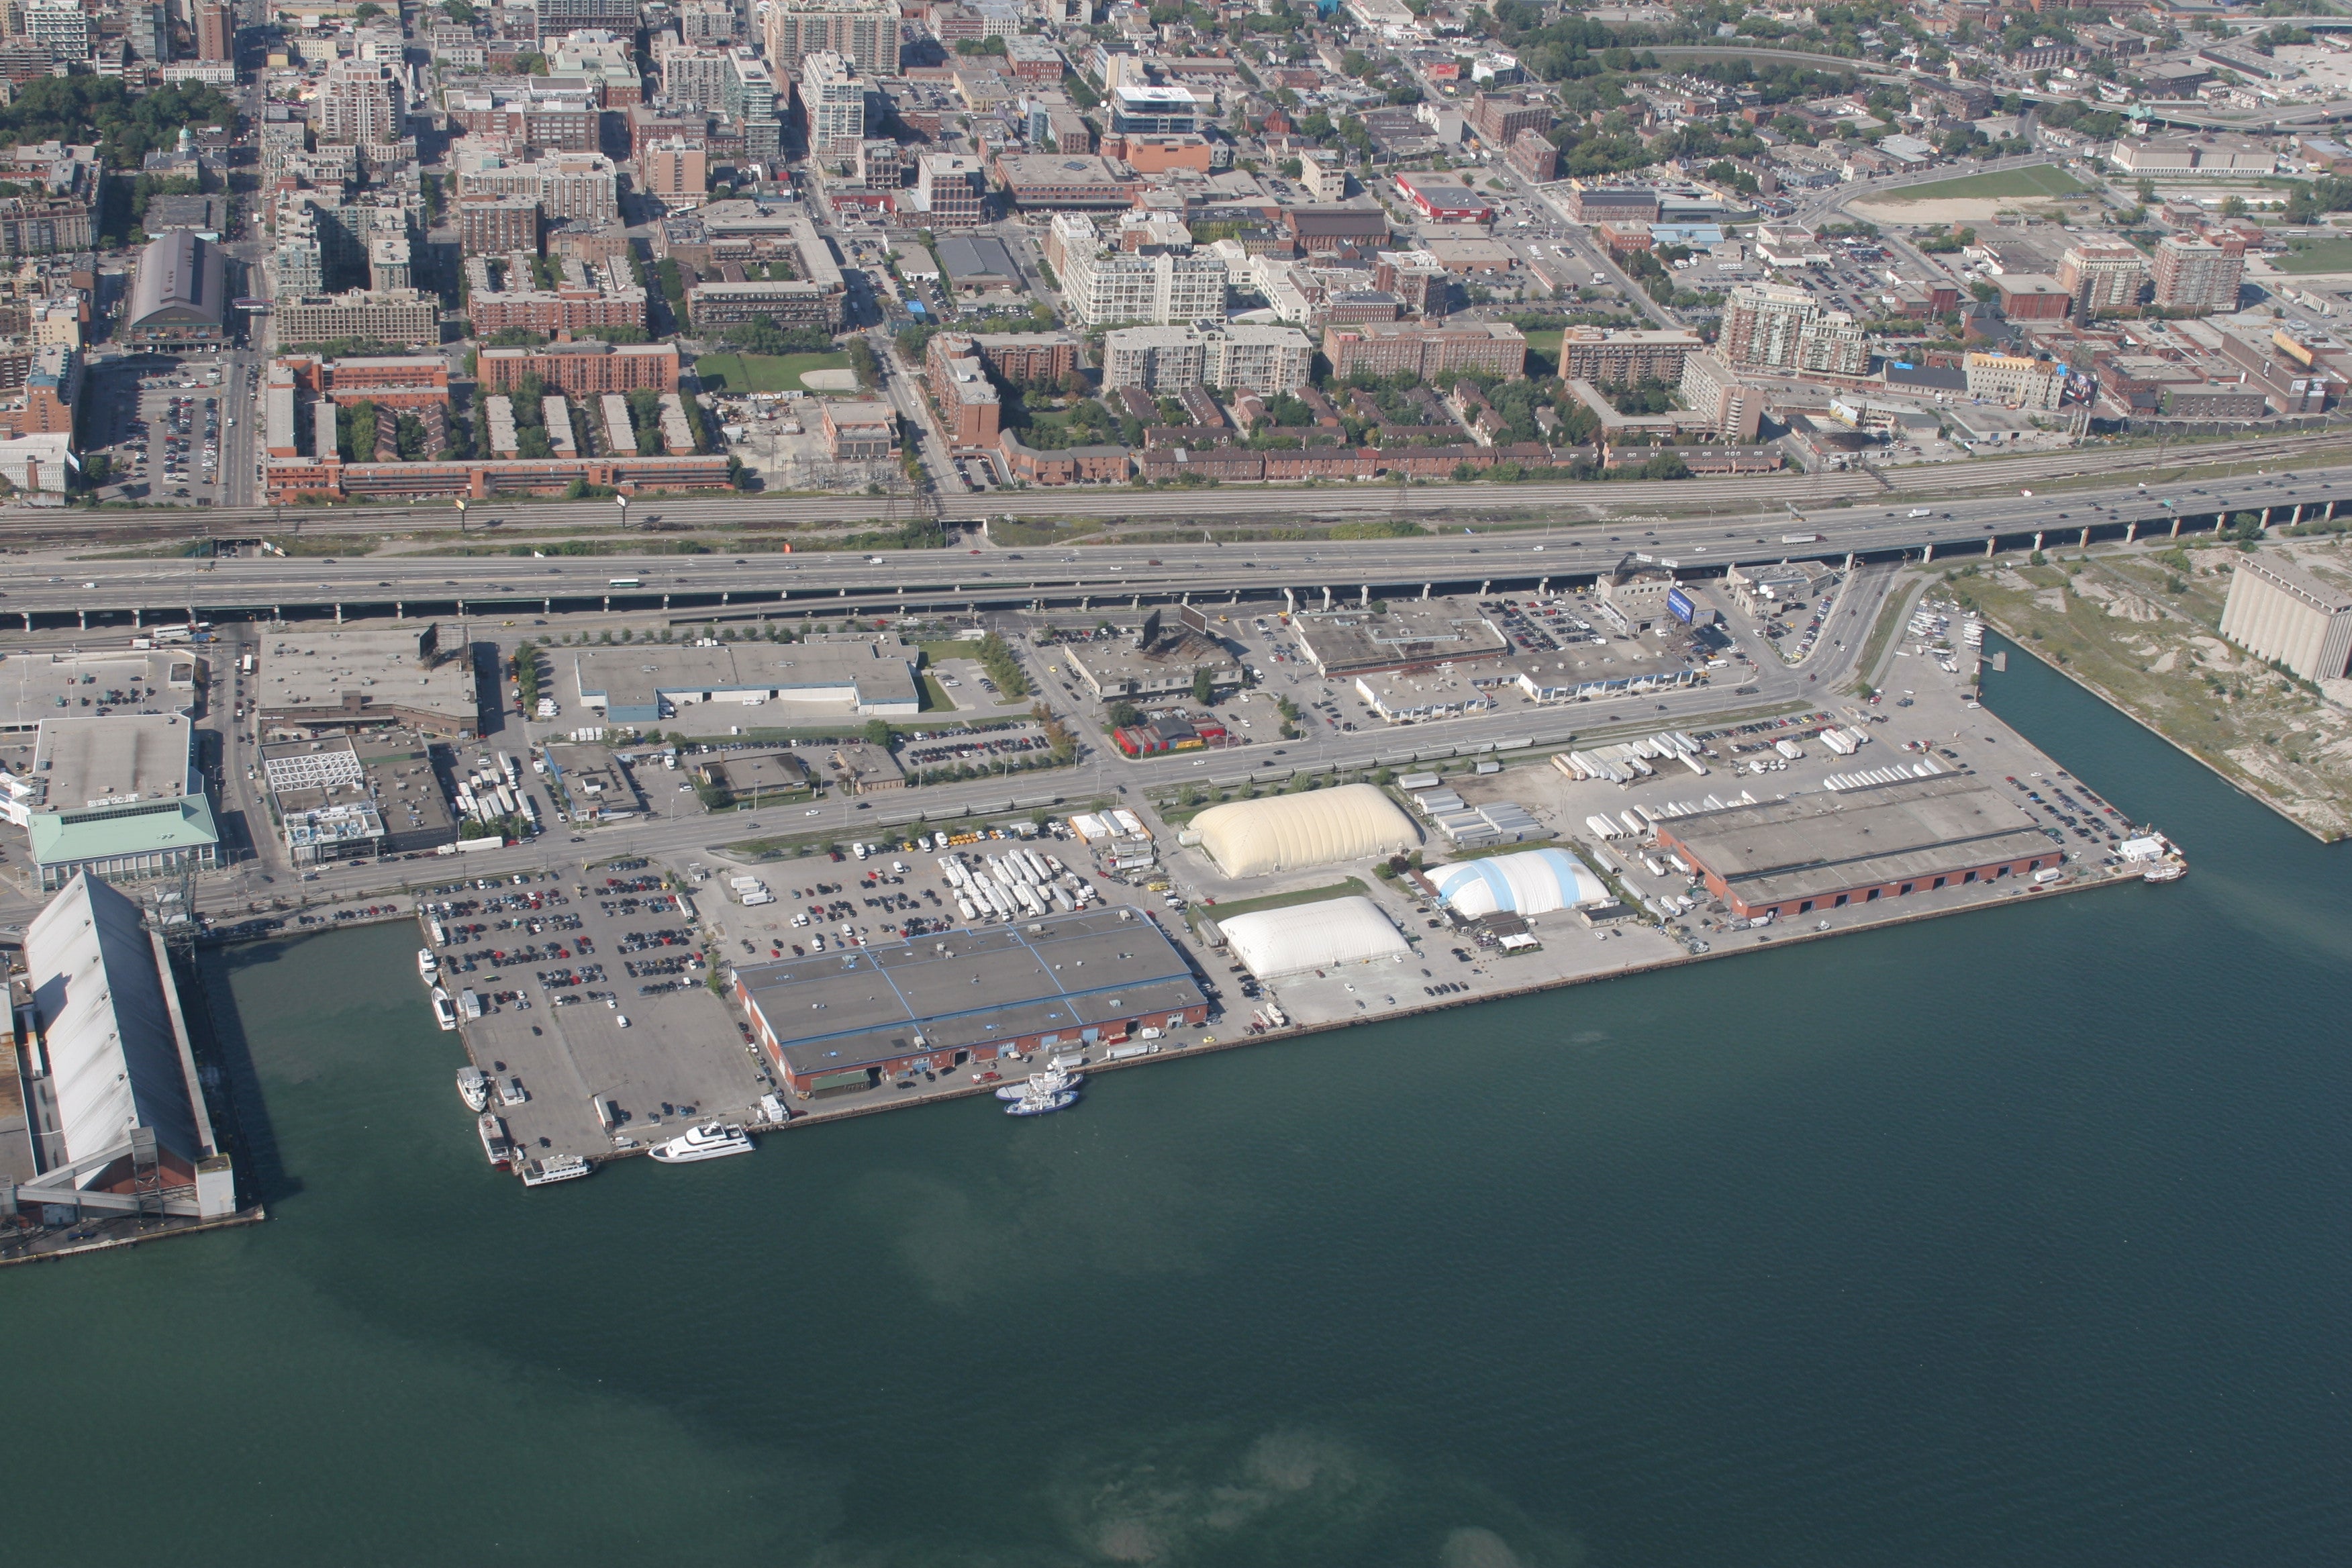 Aerial view of East Bayfront in 2005, prior to revitalization efforts.